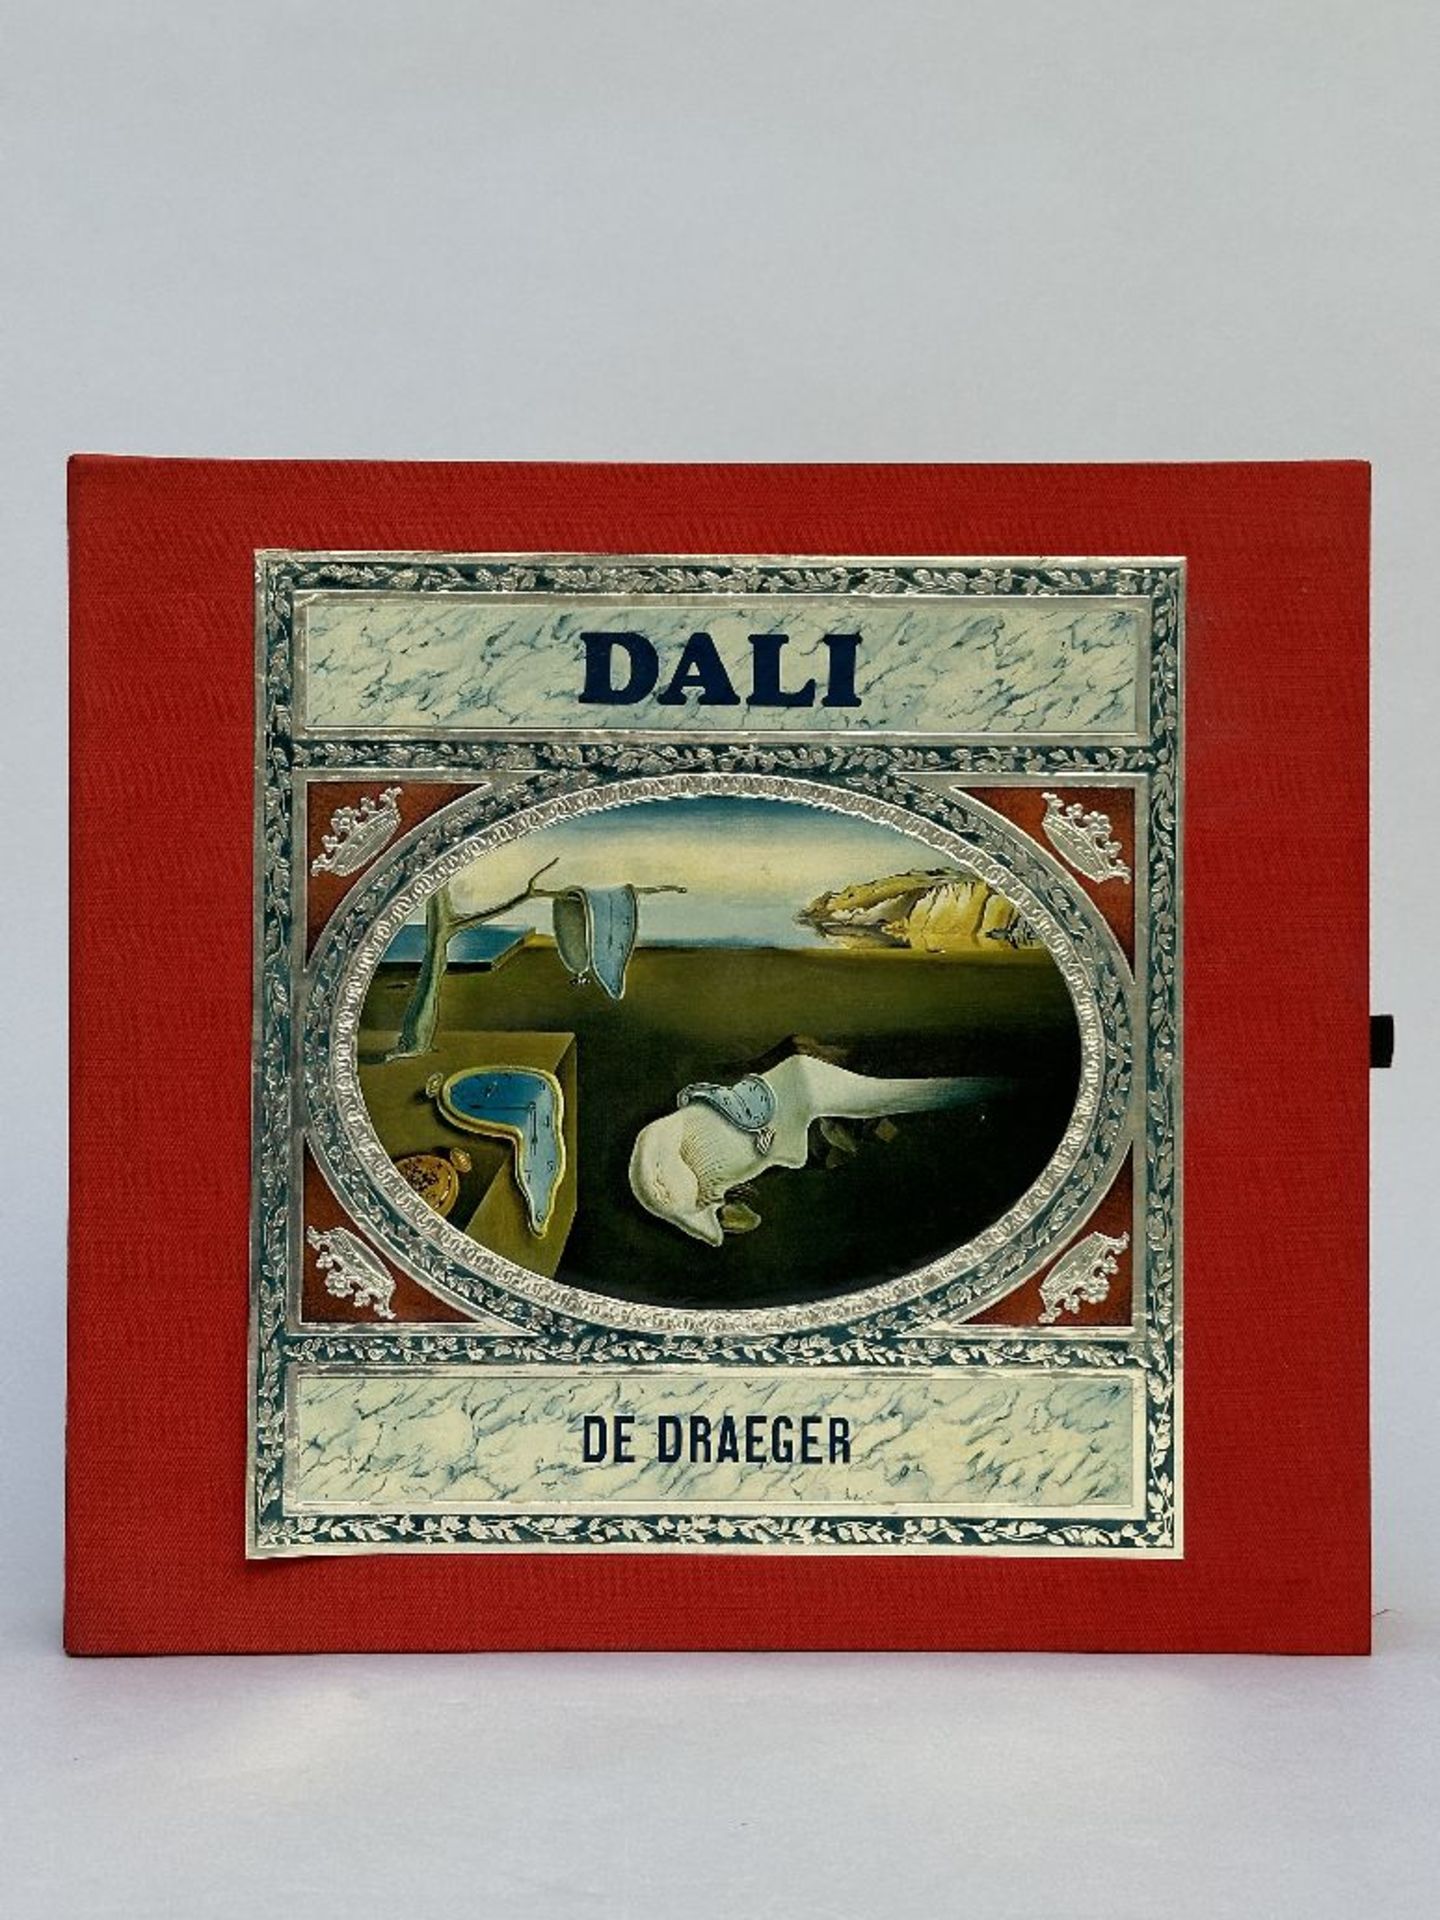 Salvador Dalí: 'The Draeger' book with bronzen medal and posters No. 244 - Image 2 of 9